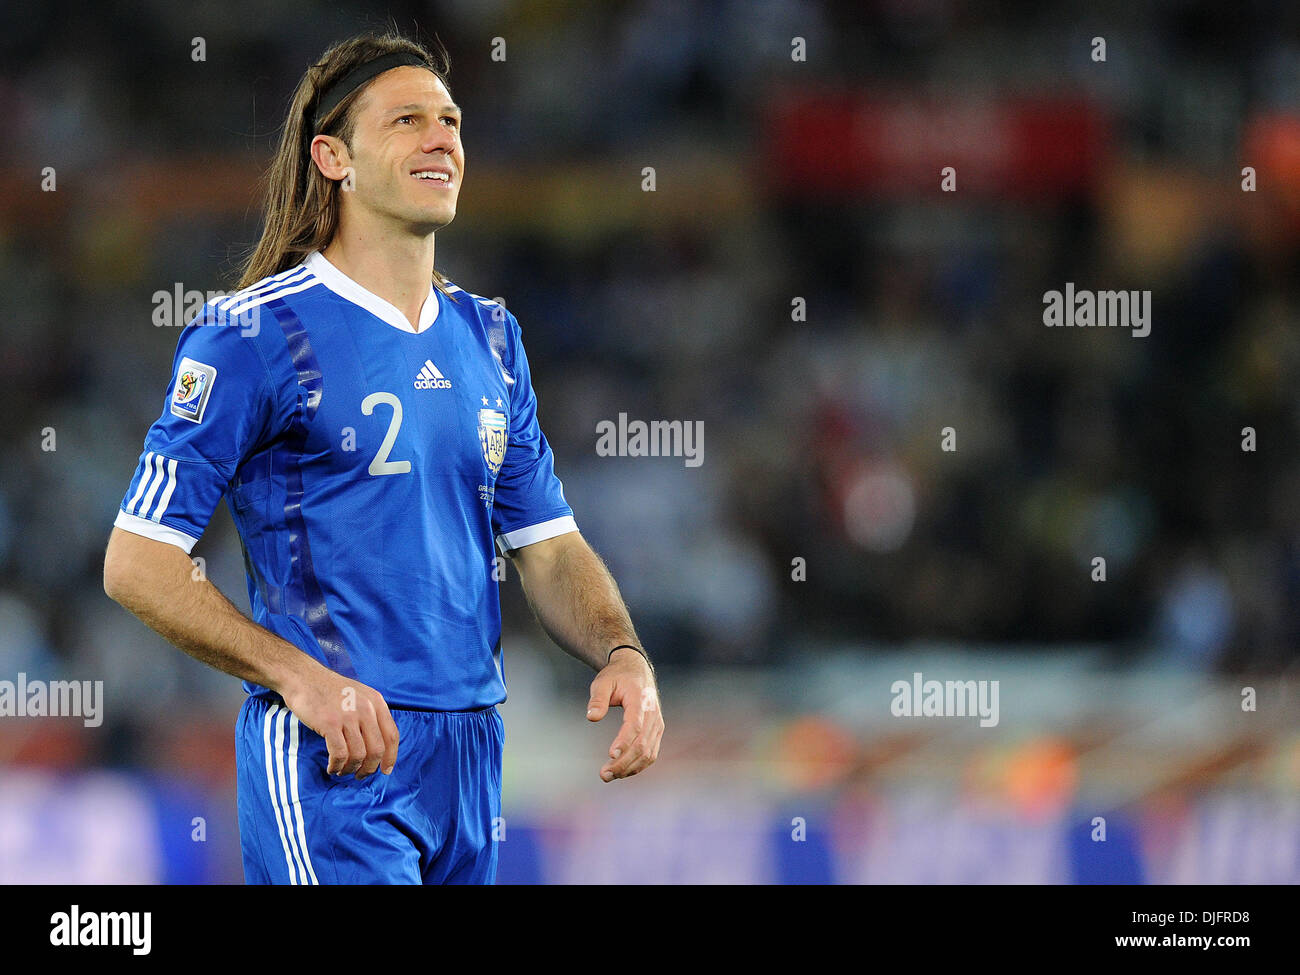 June 22, 2010 - Polokwane, South Africa - Martin Demichelis of Argentina smiles during the 2010 FIFA World Cup soccer match between Greece and Argentina at Peter Mokaba Stadium on June 22, 2010 in Polokwane, South Africa. (Credit Image: © Luca Ghidoni/ZUMApress.com) Stock Photo